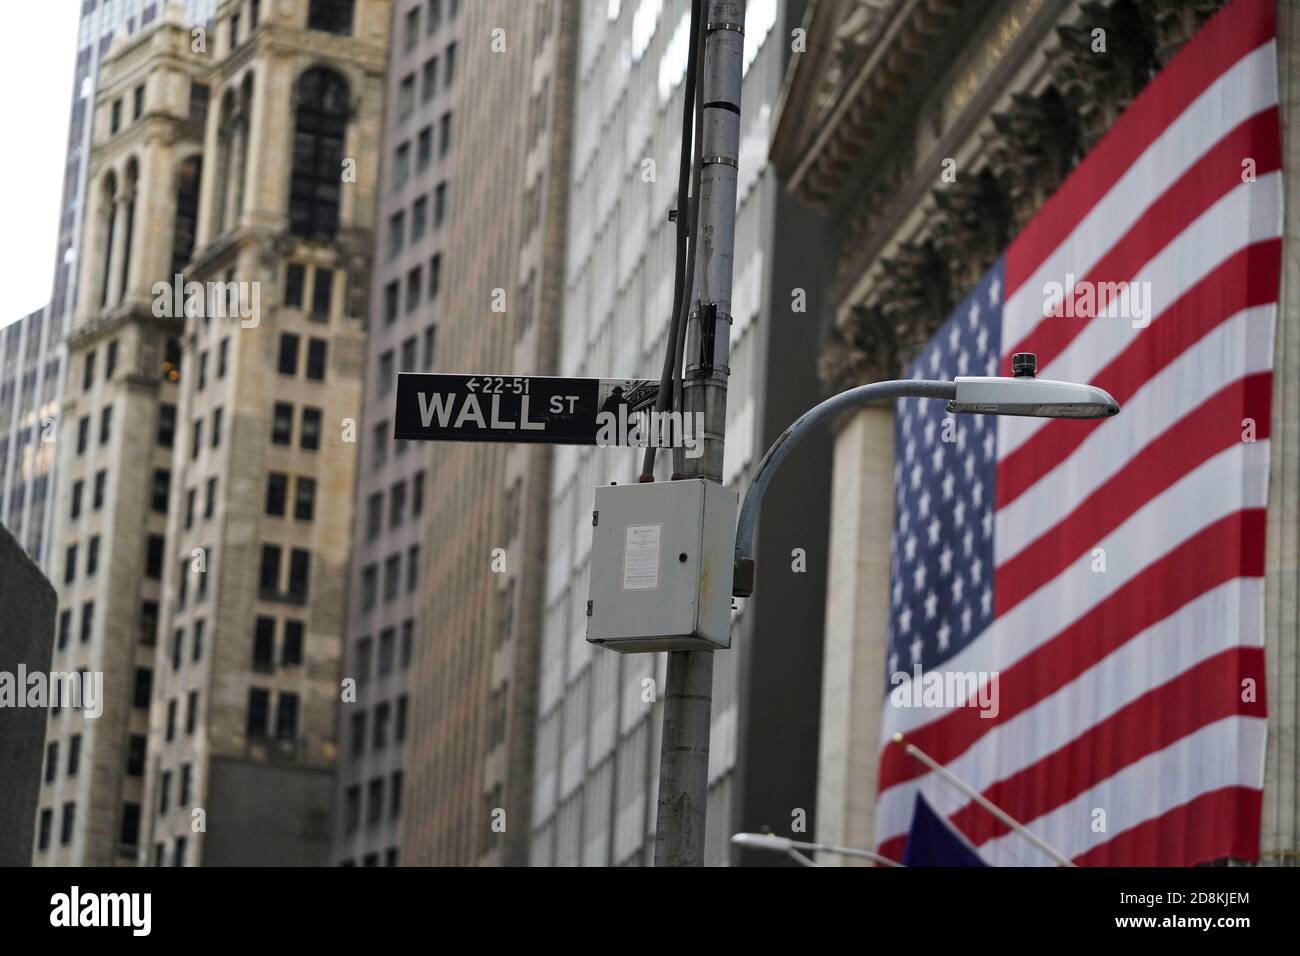 New York, USA. 30th Oct, 2020. A road sign is seen nearby the New York Stock Exchange in New York, the United States, Oct. 30, 2020. U.S. stocks closed lower on Friday, as a pronounced slide in tech sector weighed on the market. The Dow Jones Industrial Average fell 157.51 points, or 0.59 percent, to 26,501.60. The S&P 500 was down 40.15 points, or 1.21 percent, to 3,269.96. The Nasdaq Composite Index shed 274.00 points, or 2.45 percent, to 10,911.59. Credit: Wang Ying/Xinhua/Alamy Live News Stock Photo